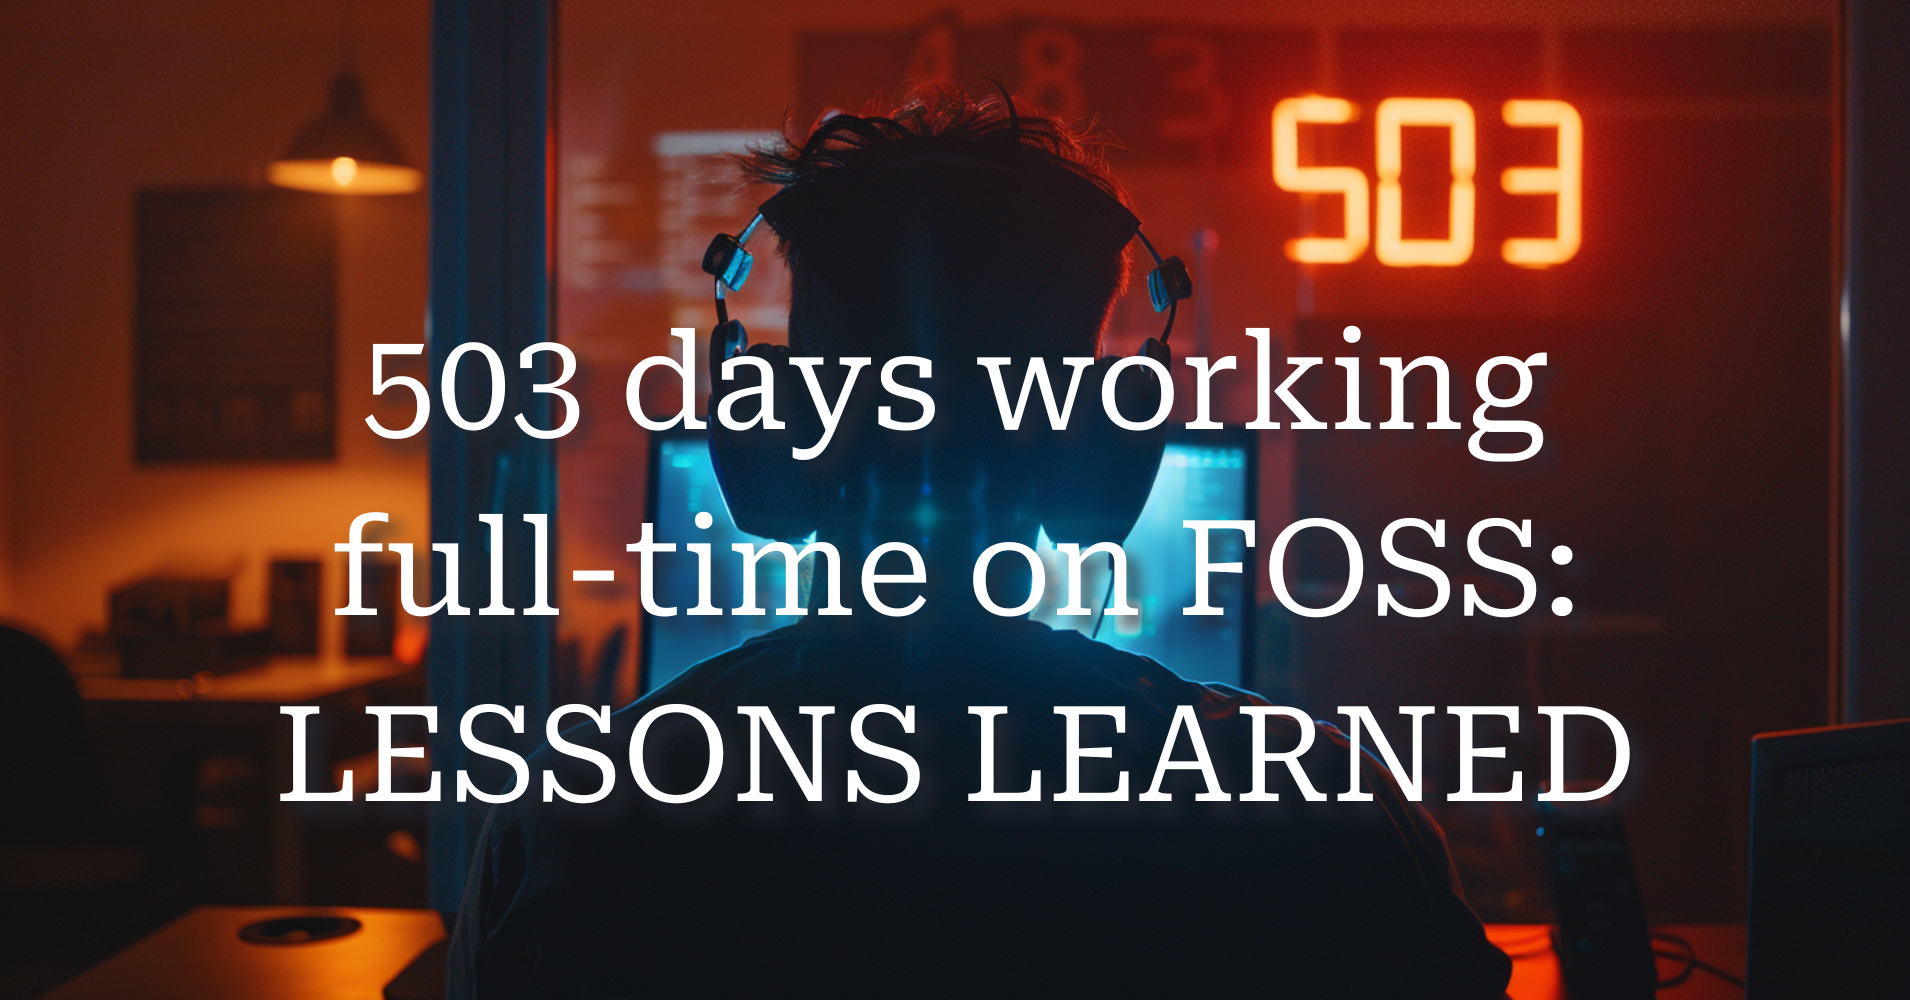 503 days working full-time on FOSS: lessons learned